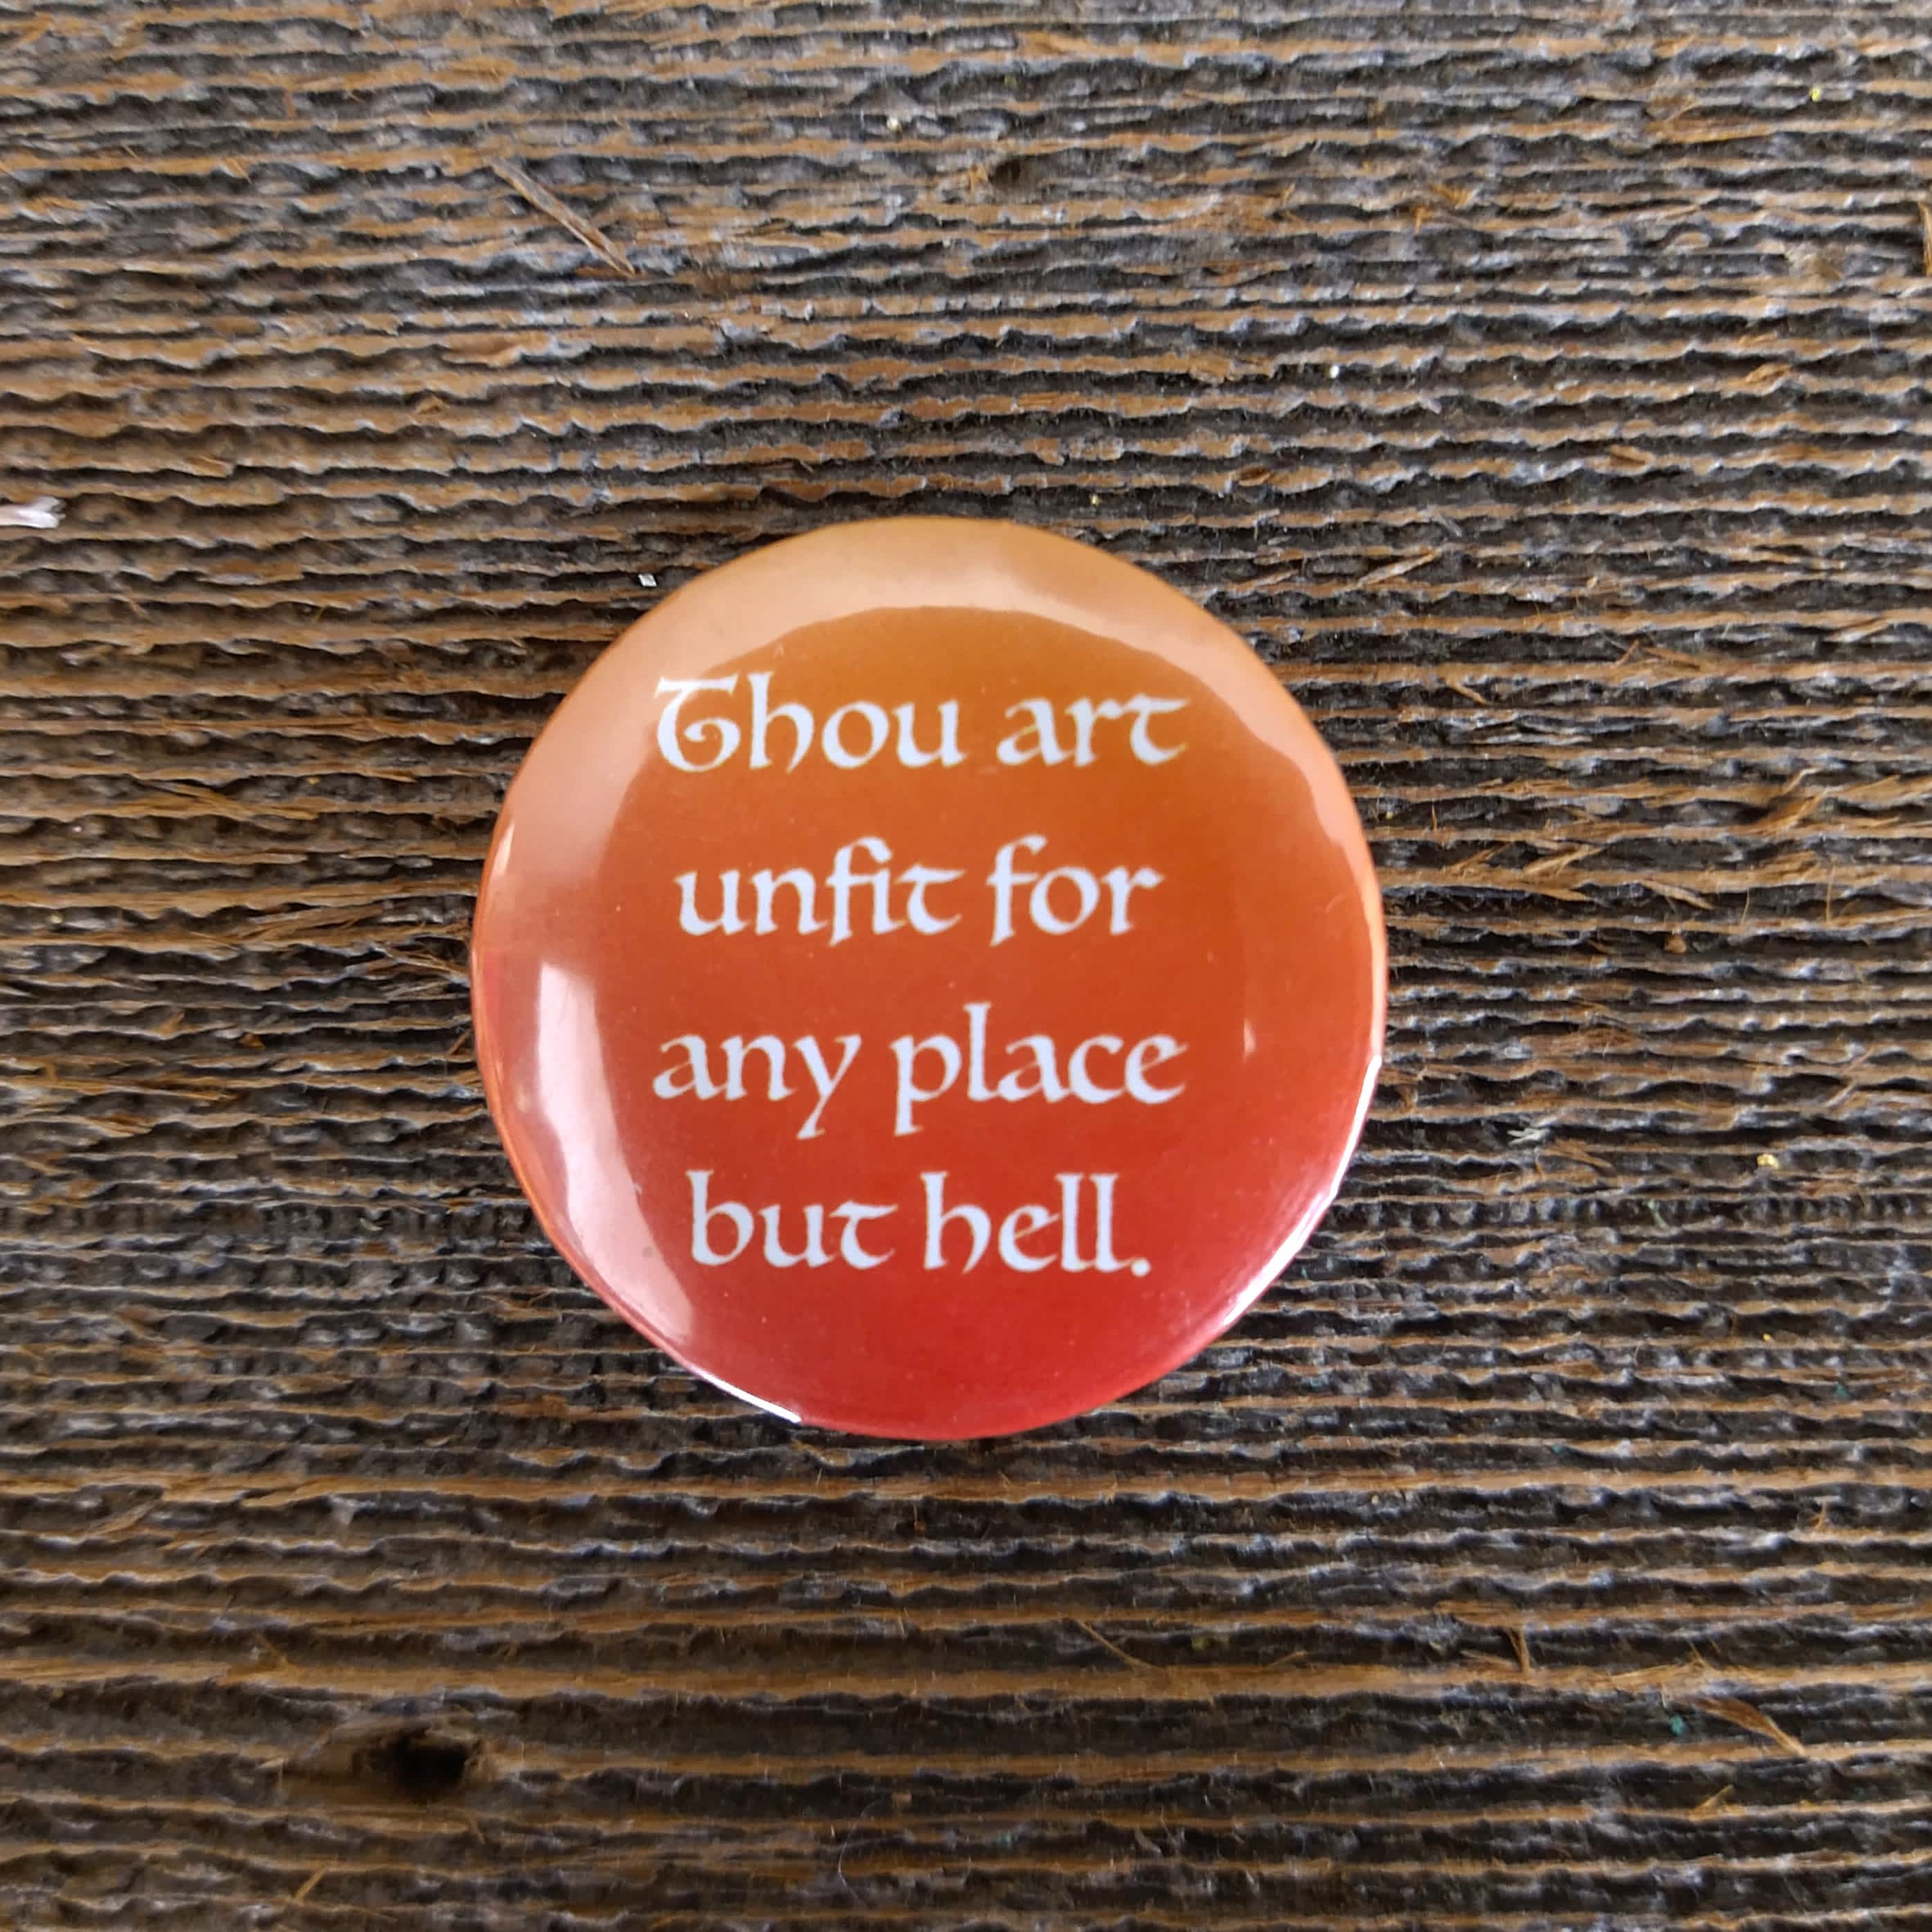 Shakespeare Hell Pin - Hand-made buttons created by a Courtney Calkins, a Humboldt native. 